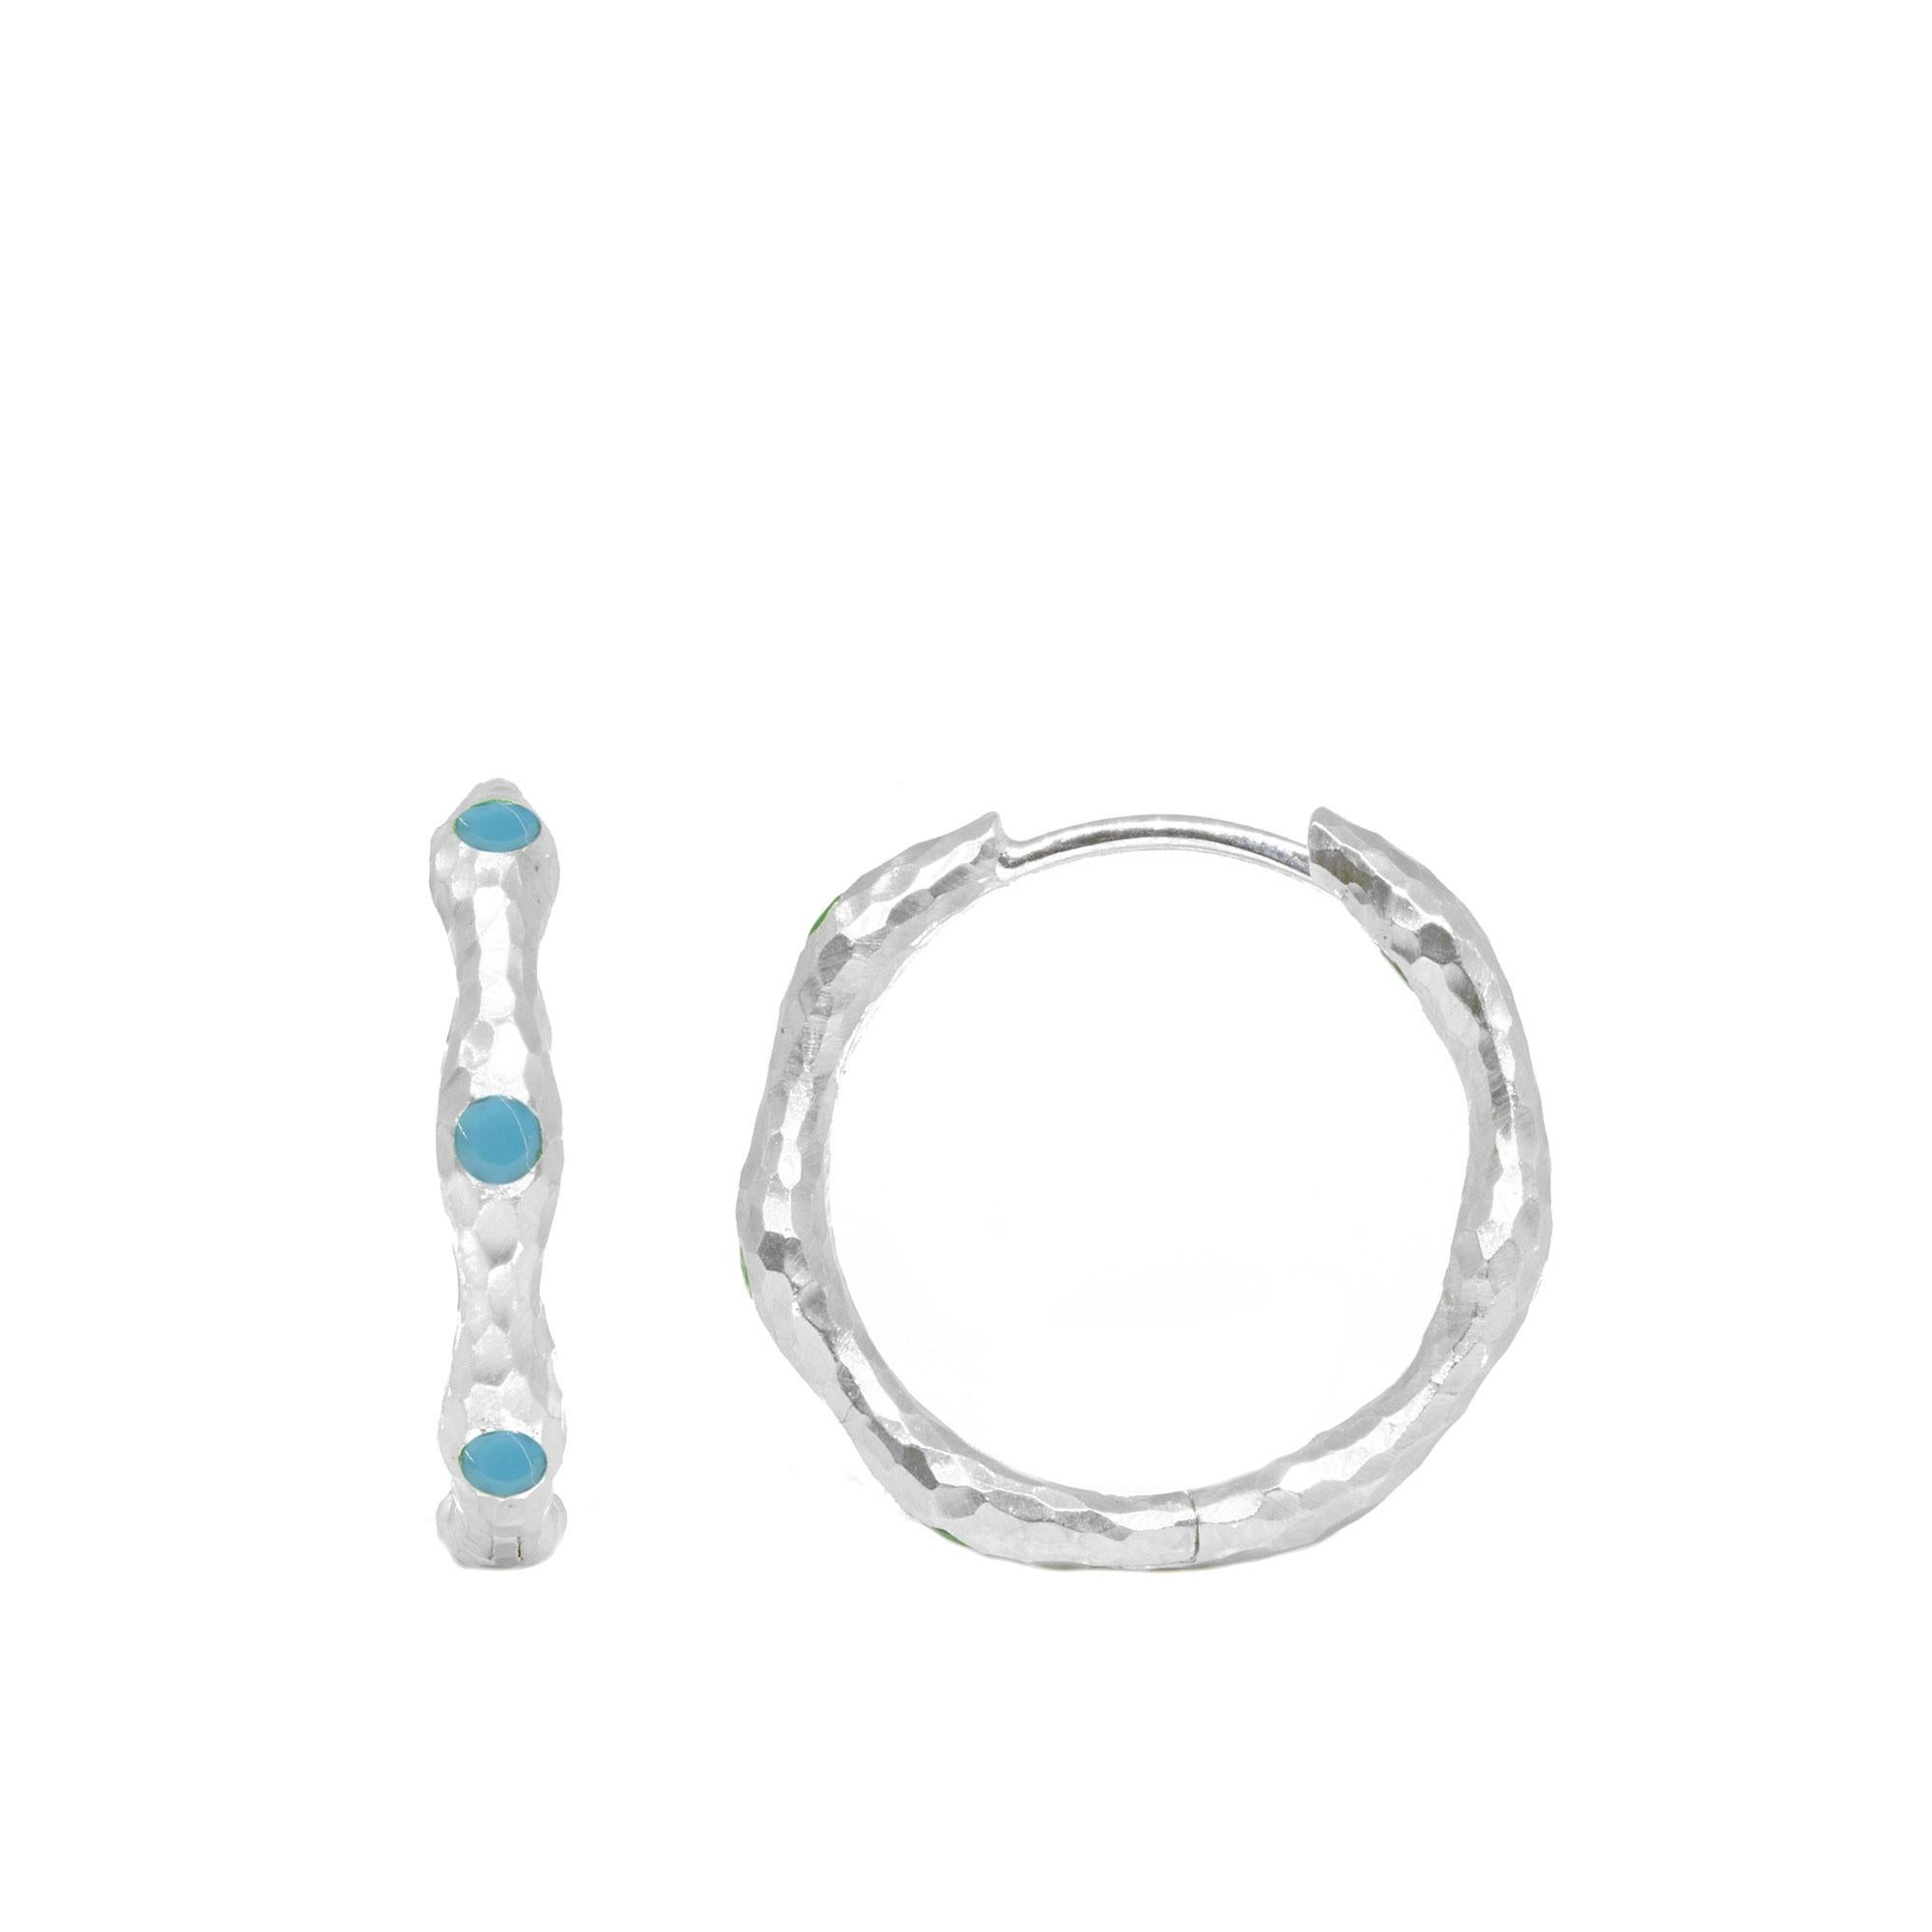 The turquoise accented sterling silver Forged Hoop Earrings are made for dangling your favorite Charms (or a few). Or wear them on their own for an effortless, understated look. 

Metal: Sterling Silver
Stone carat: 1.25
Size: 22mm
Stone size: